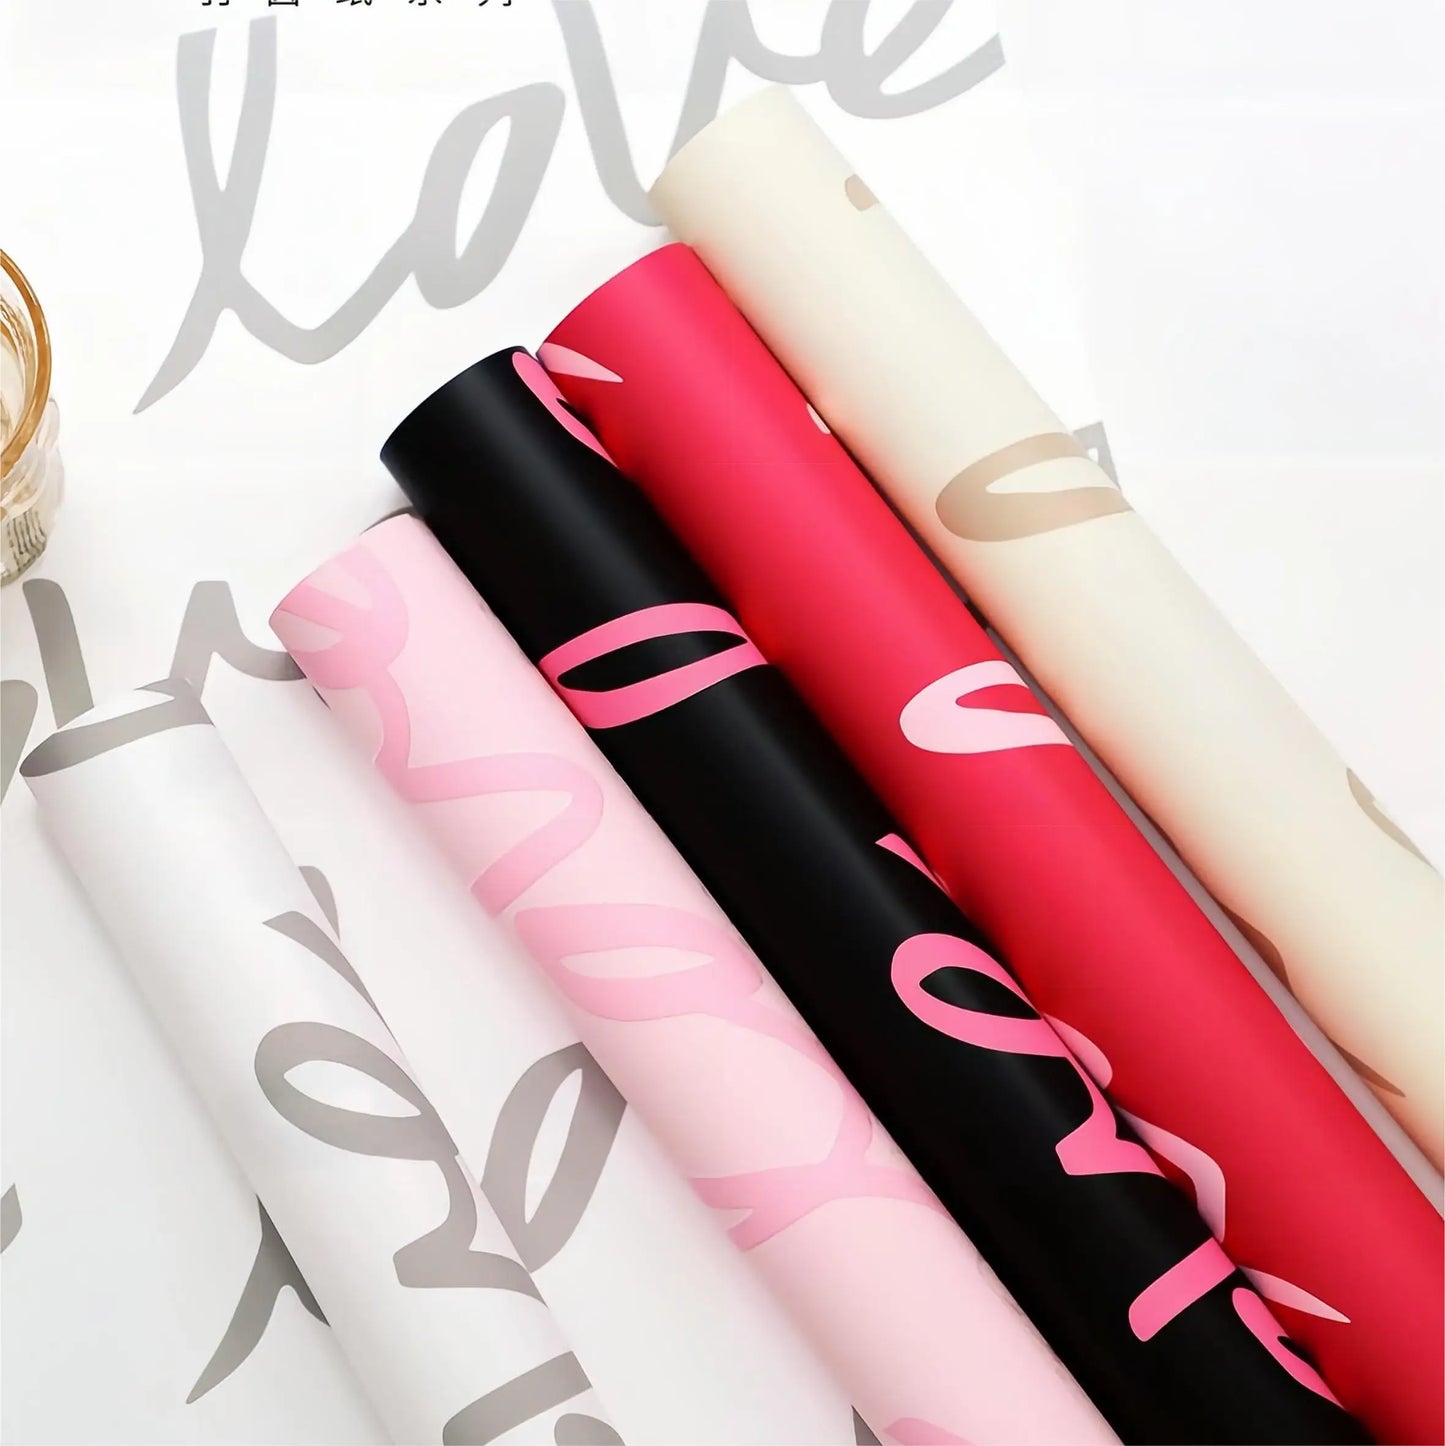 LOVE Flowers Wrapping Paper,22.8*22.8 inch - 20 sheets